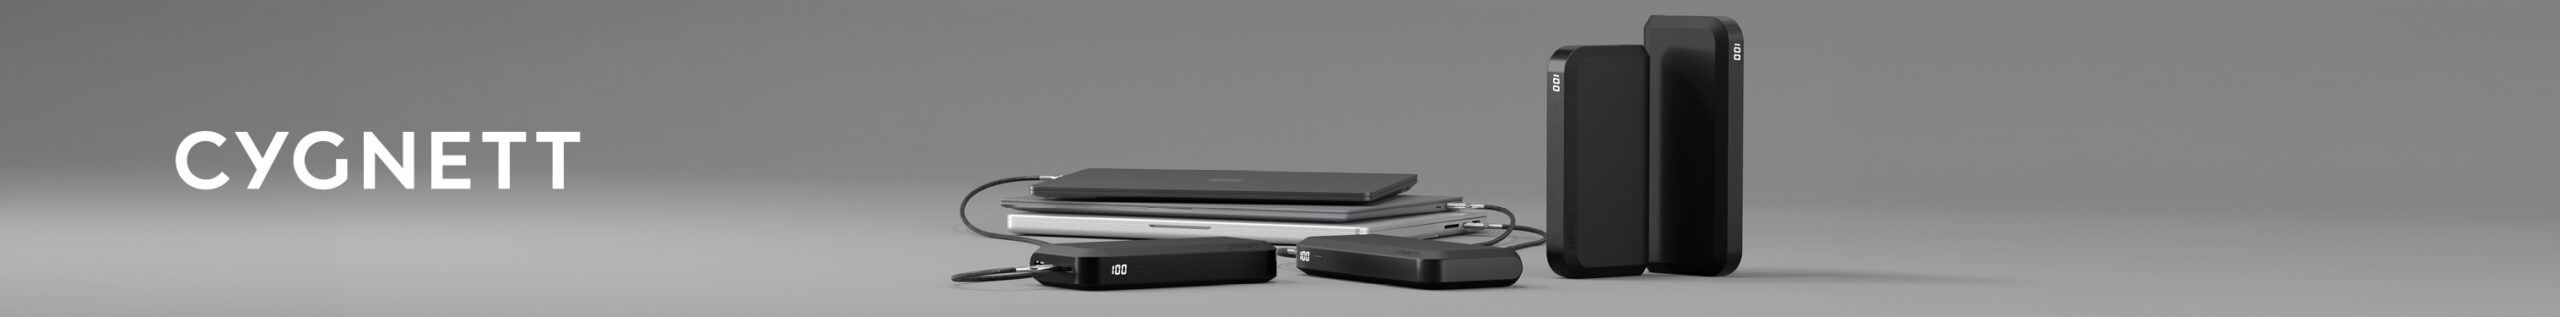 4SquareMedia 728x90 scaled Nokia To Launch Web Browsing Tablet This Year